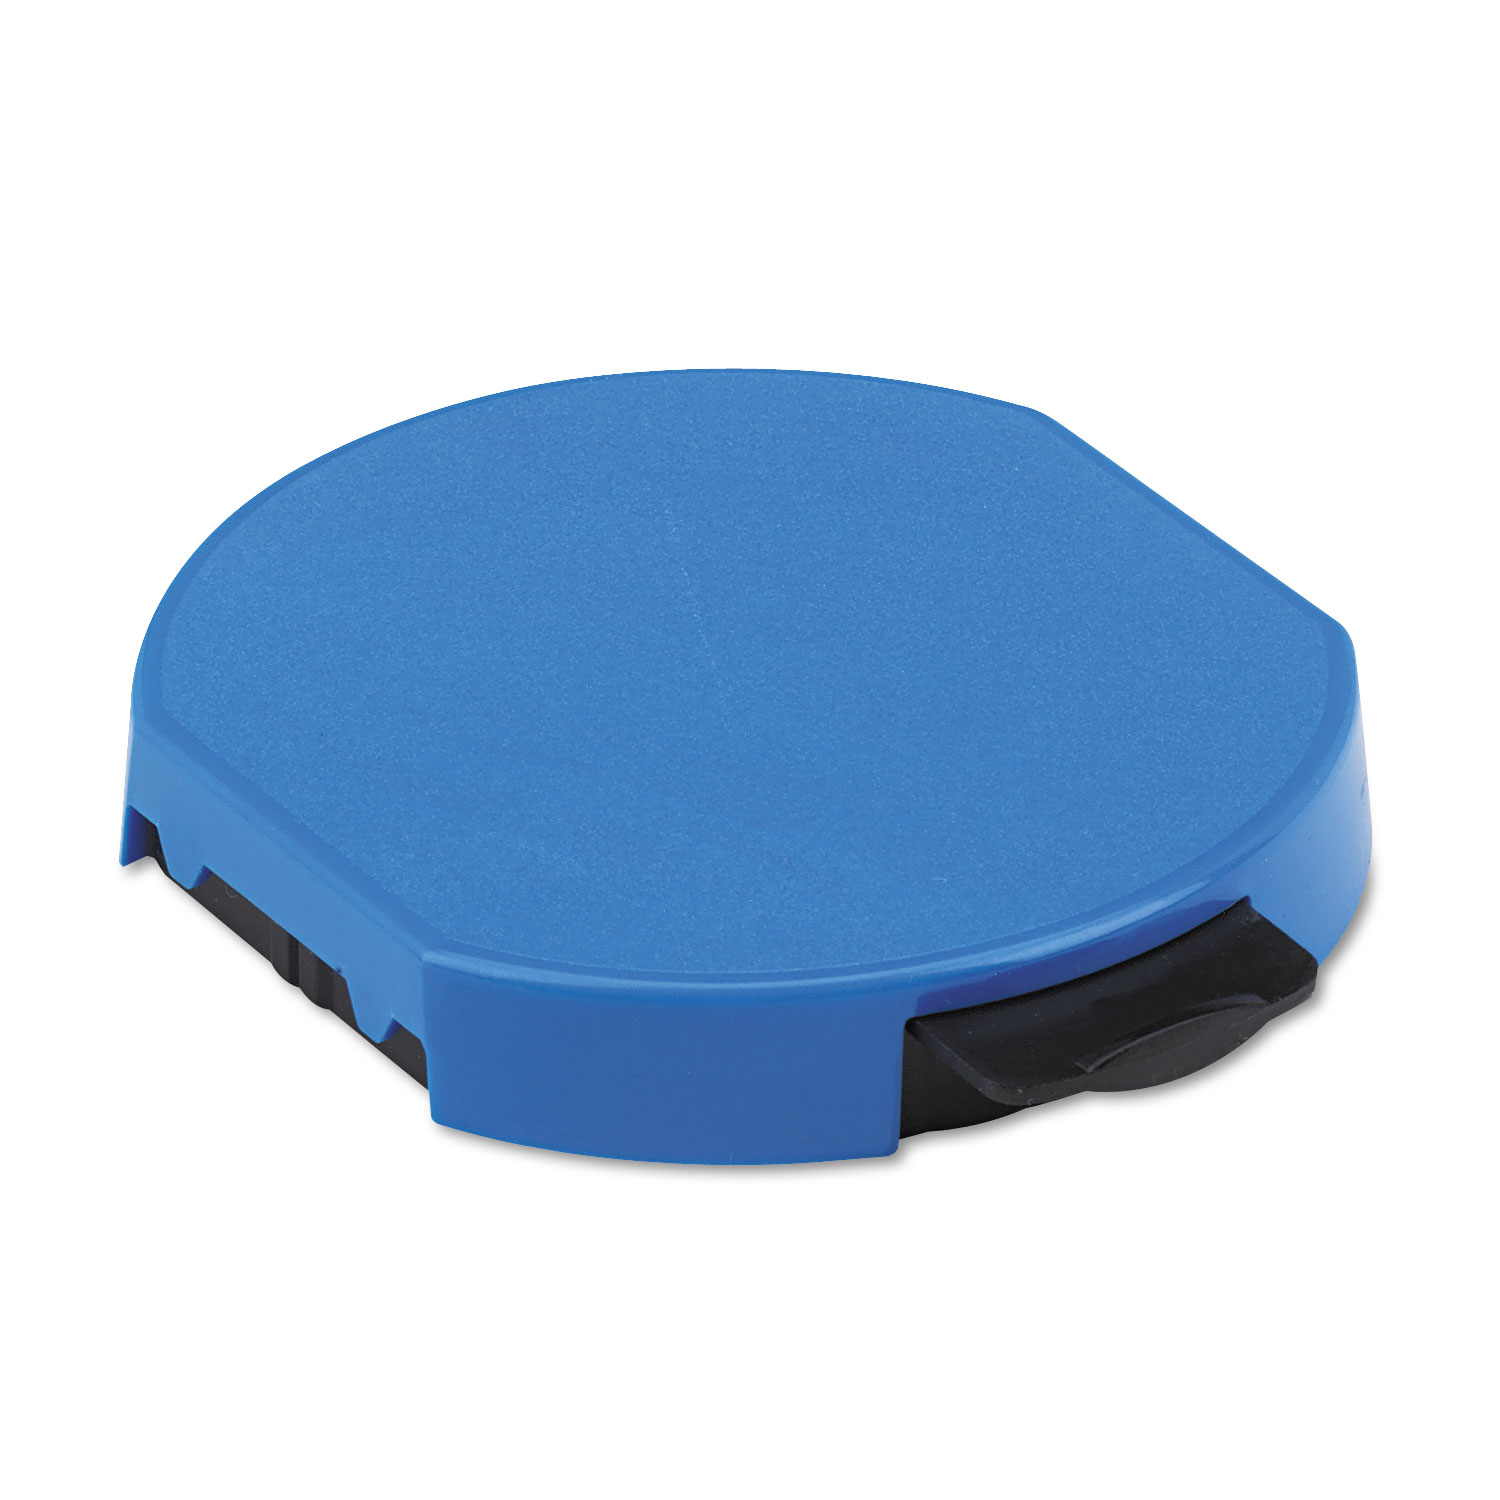 Trodat T5415 Stamp Replacement Ink Pad, 1 3/4, Blue